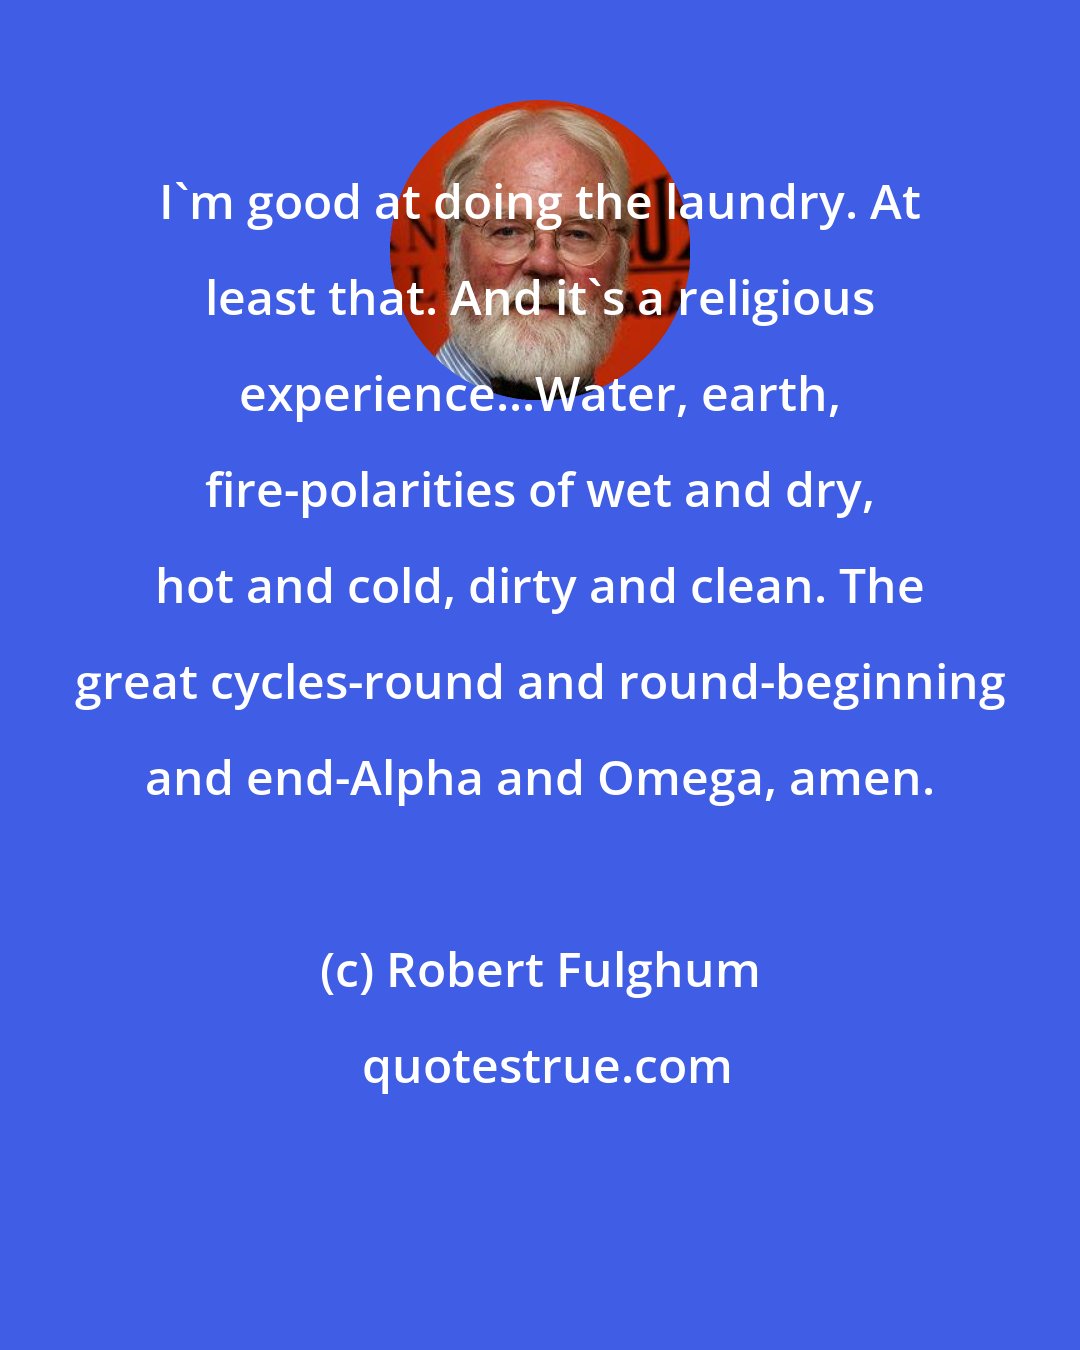 Robert Fulghum: I'm good at doing the laundry. At least that. And it's a religious experience...Water, earth, fire-polarities of wet and dry, hot and cold, dirty and clean. The great cycles-round and round-beginning and end-Alpha and Omega, amen.